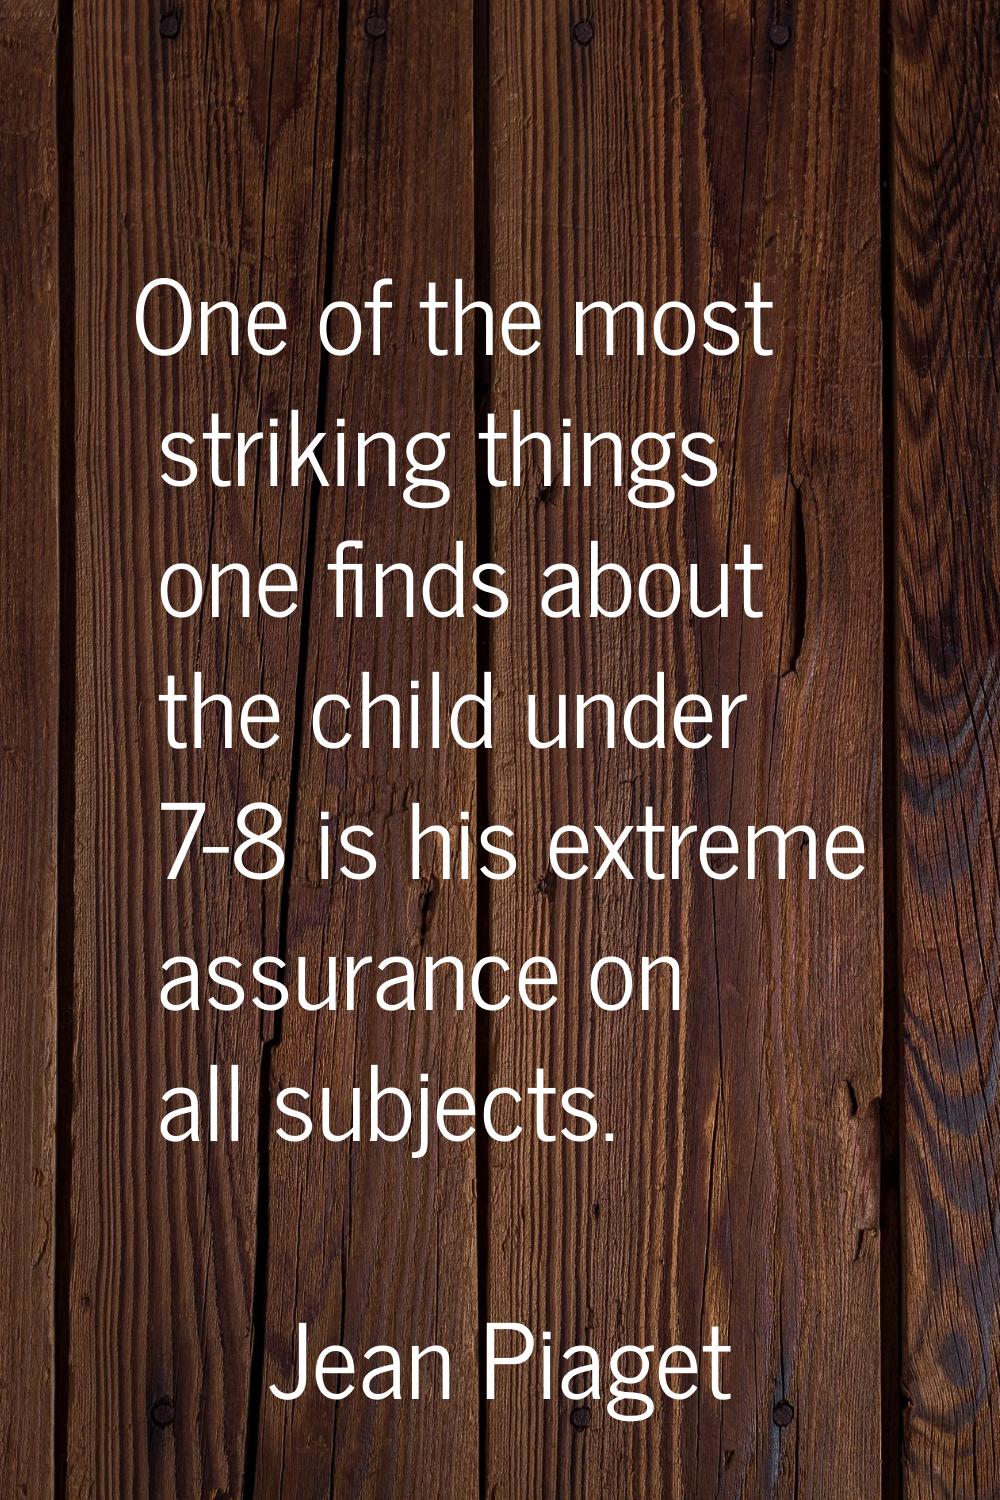 One of the most striking things one finds about the child under 7-8 is his extreme assurance on all